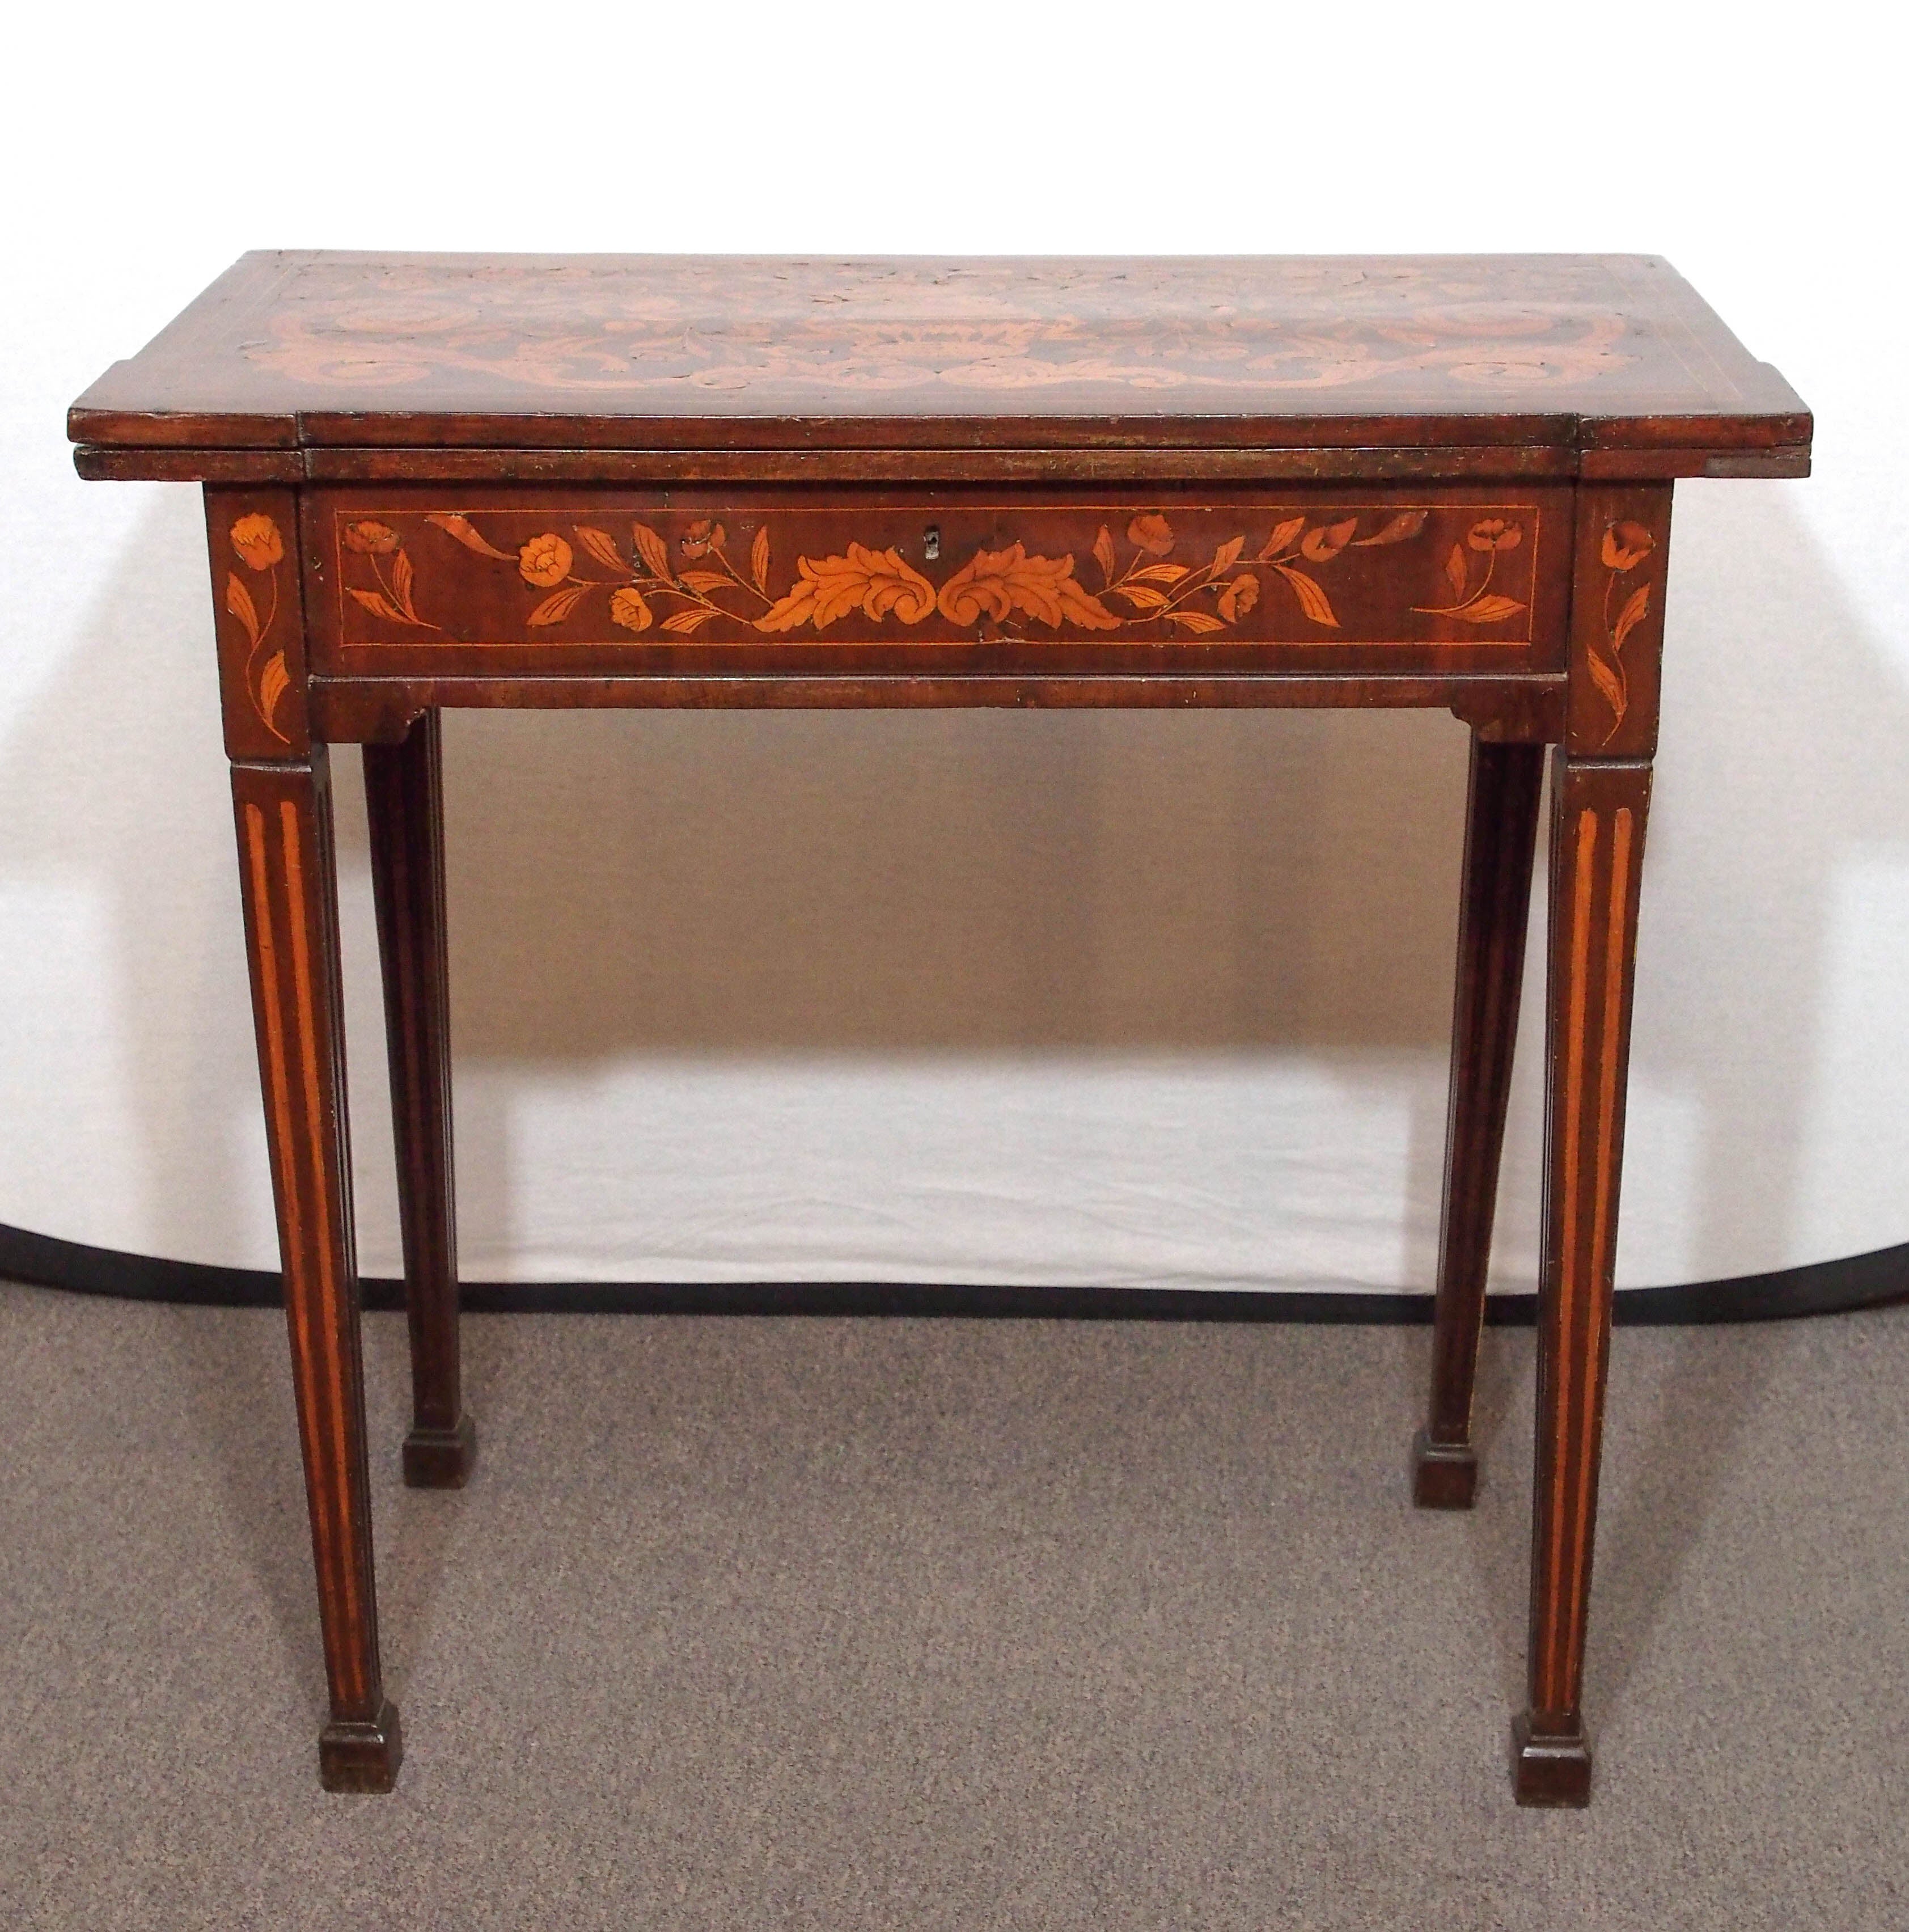 Antique Dutch Marquetry Fold over Game Table